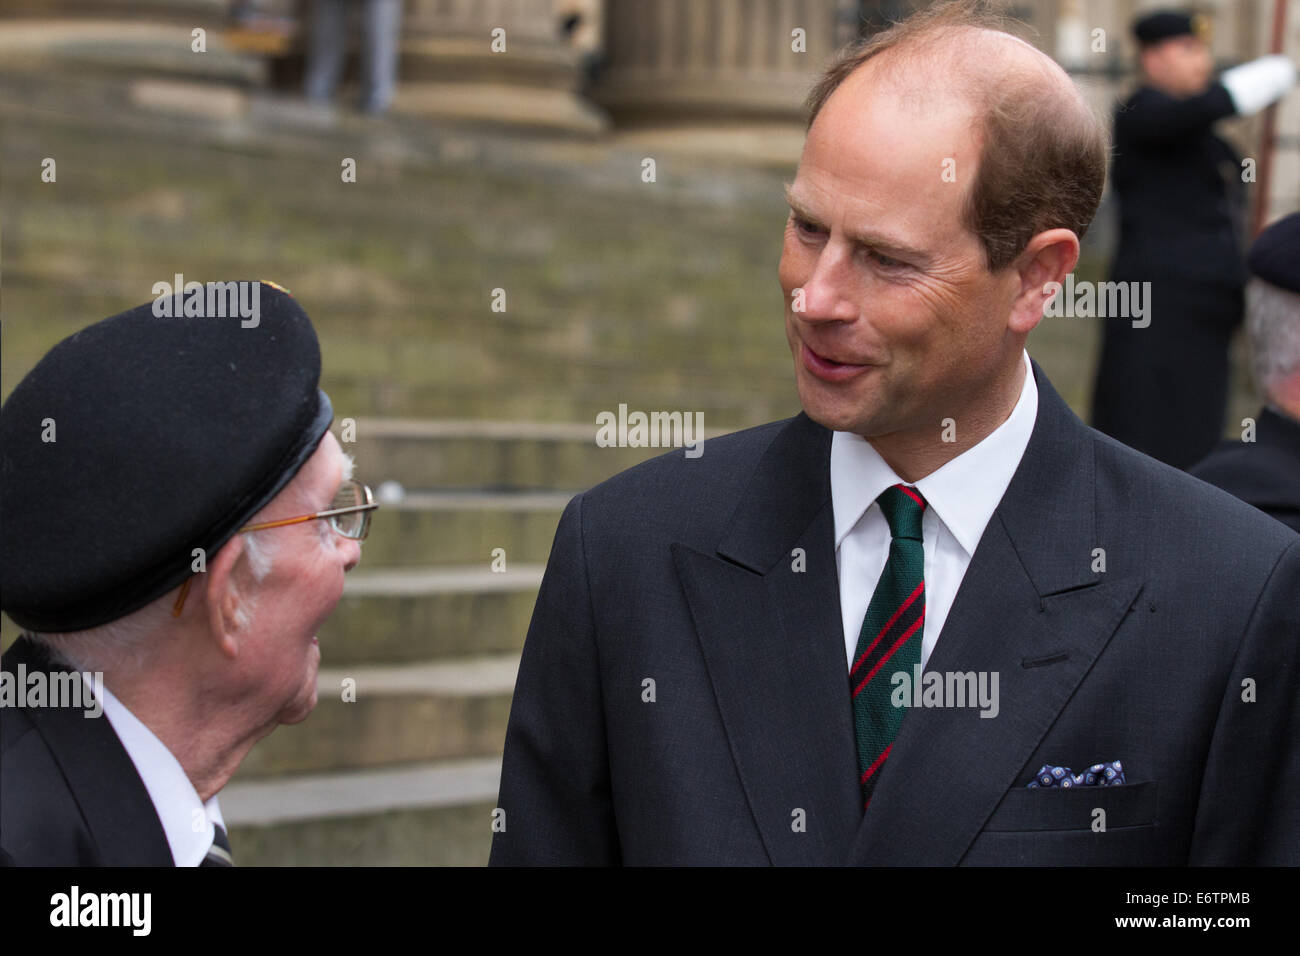 Liverpool, Merseyside, UK 31st August, 2014. H.R.H.  Prince Edward with army veteran Mr Albert Leek, 89  at Liverpool Pals commemoration and the re-enactment of the Liverpool Pals signing up to answer Lord Derby's call for recruits 100 years to the day it happened. Liverpool's success prompted other towns to form units, with civic pride and community spirit driving competition to raise the highest numbers. Stock Photo